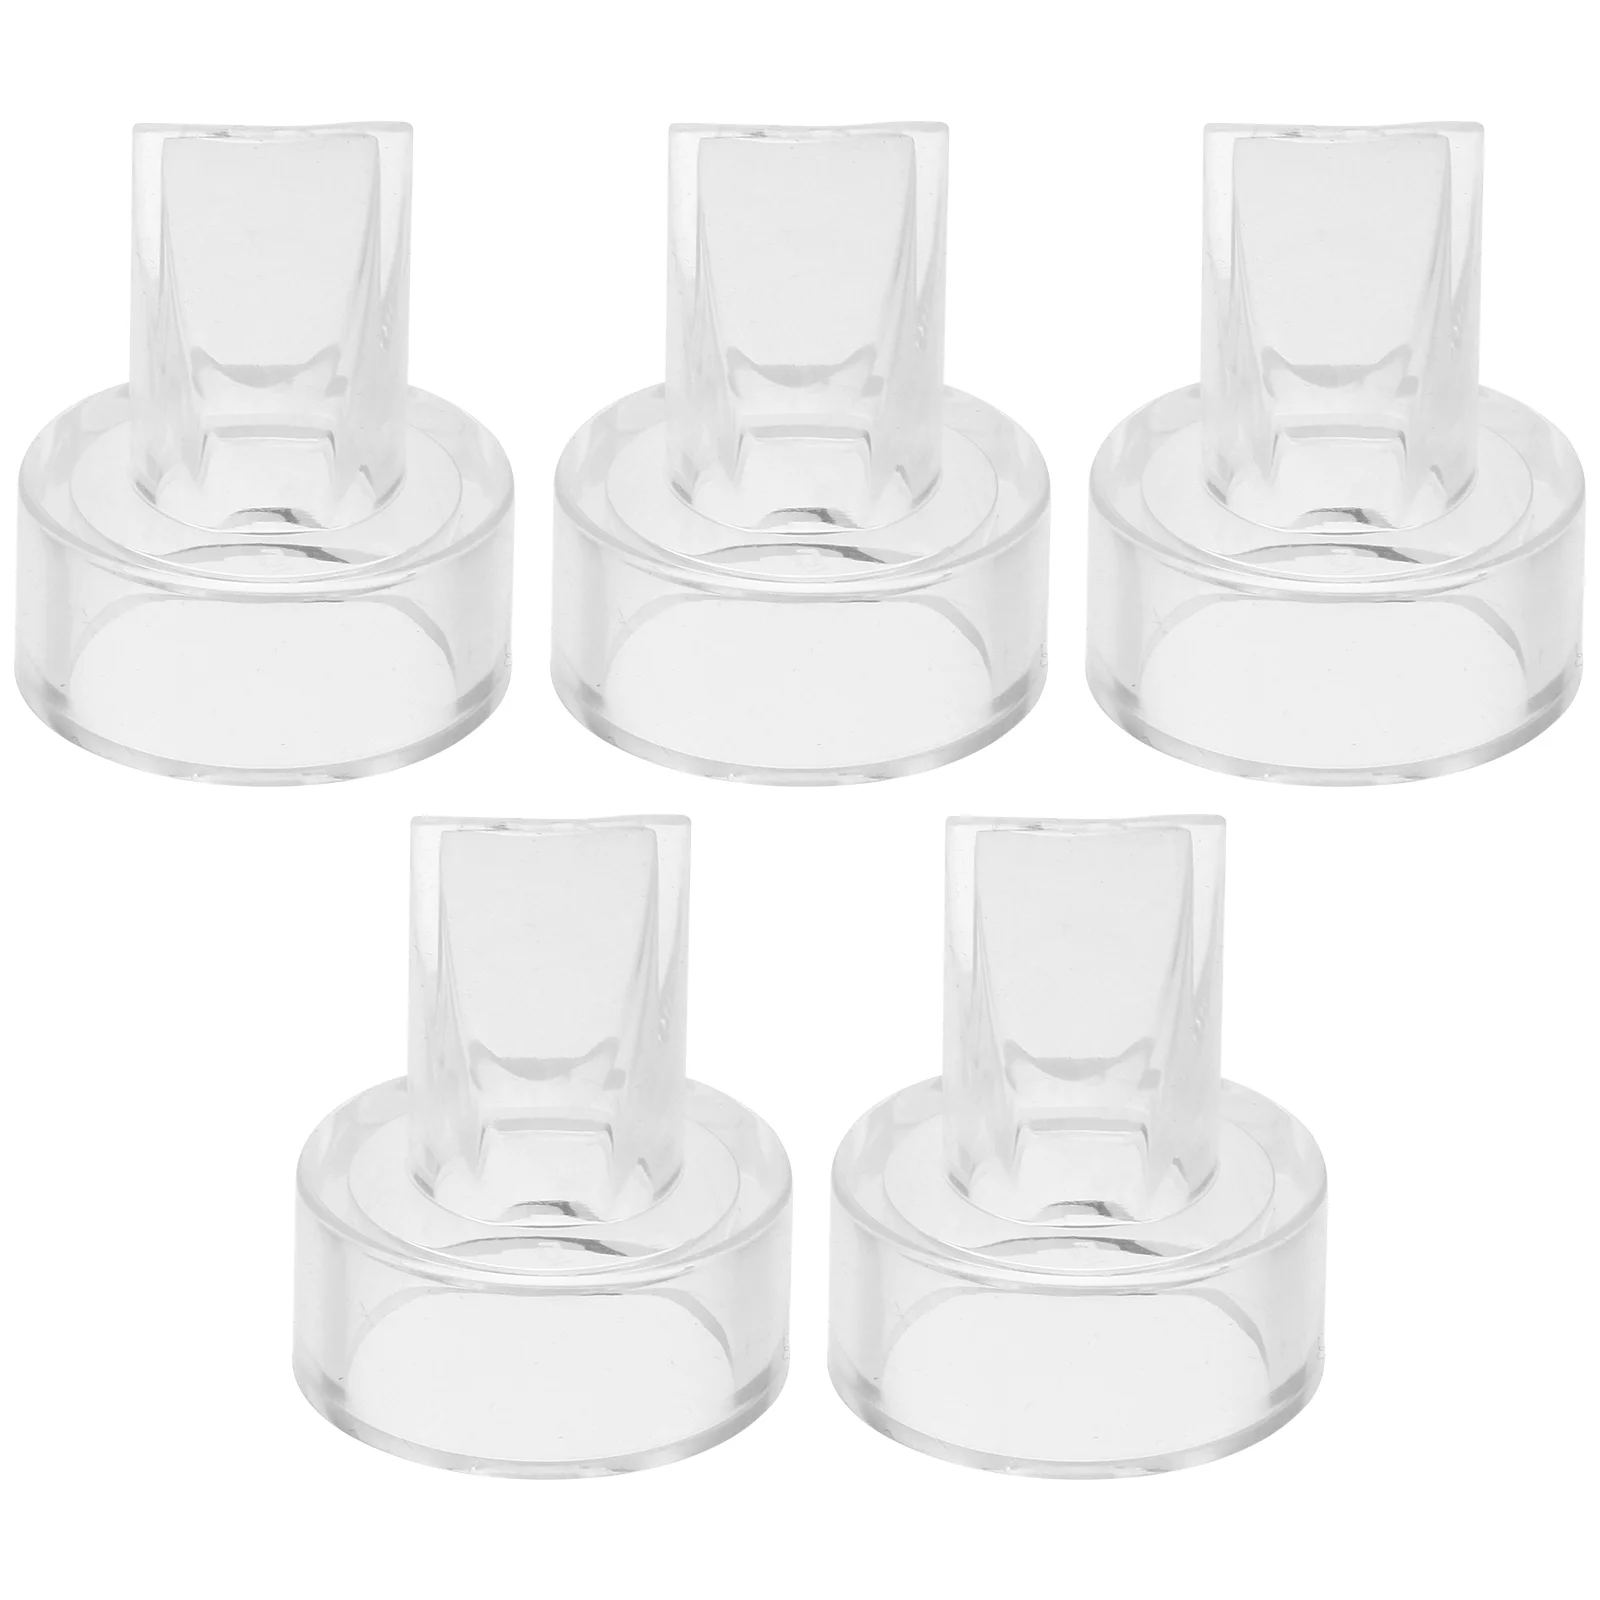 

5 Pcs Valve Manual Breast Pump Parts Electric Accessories High Heel Protectors Silicone Silica Gel Baby Suction Bowls